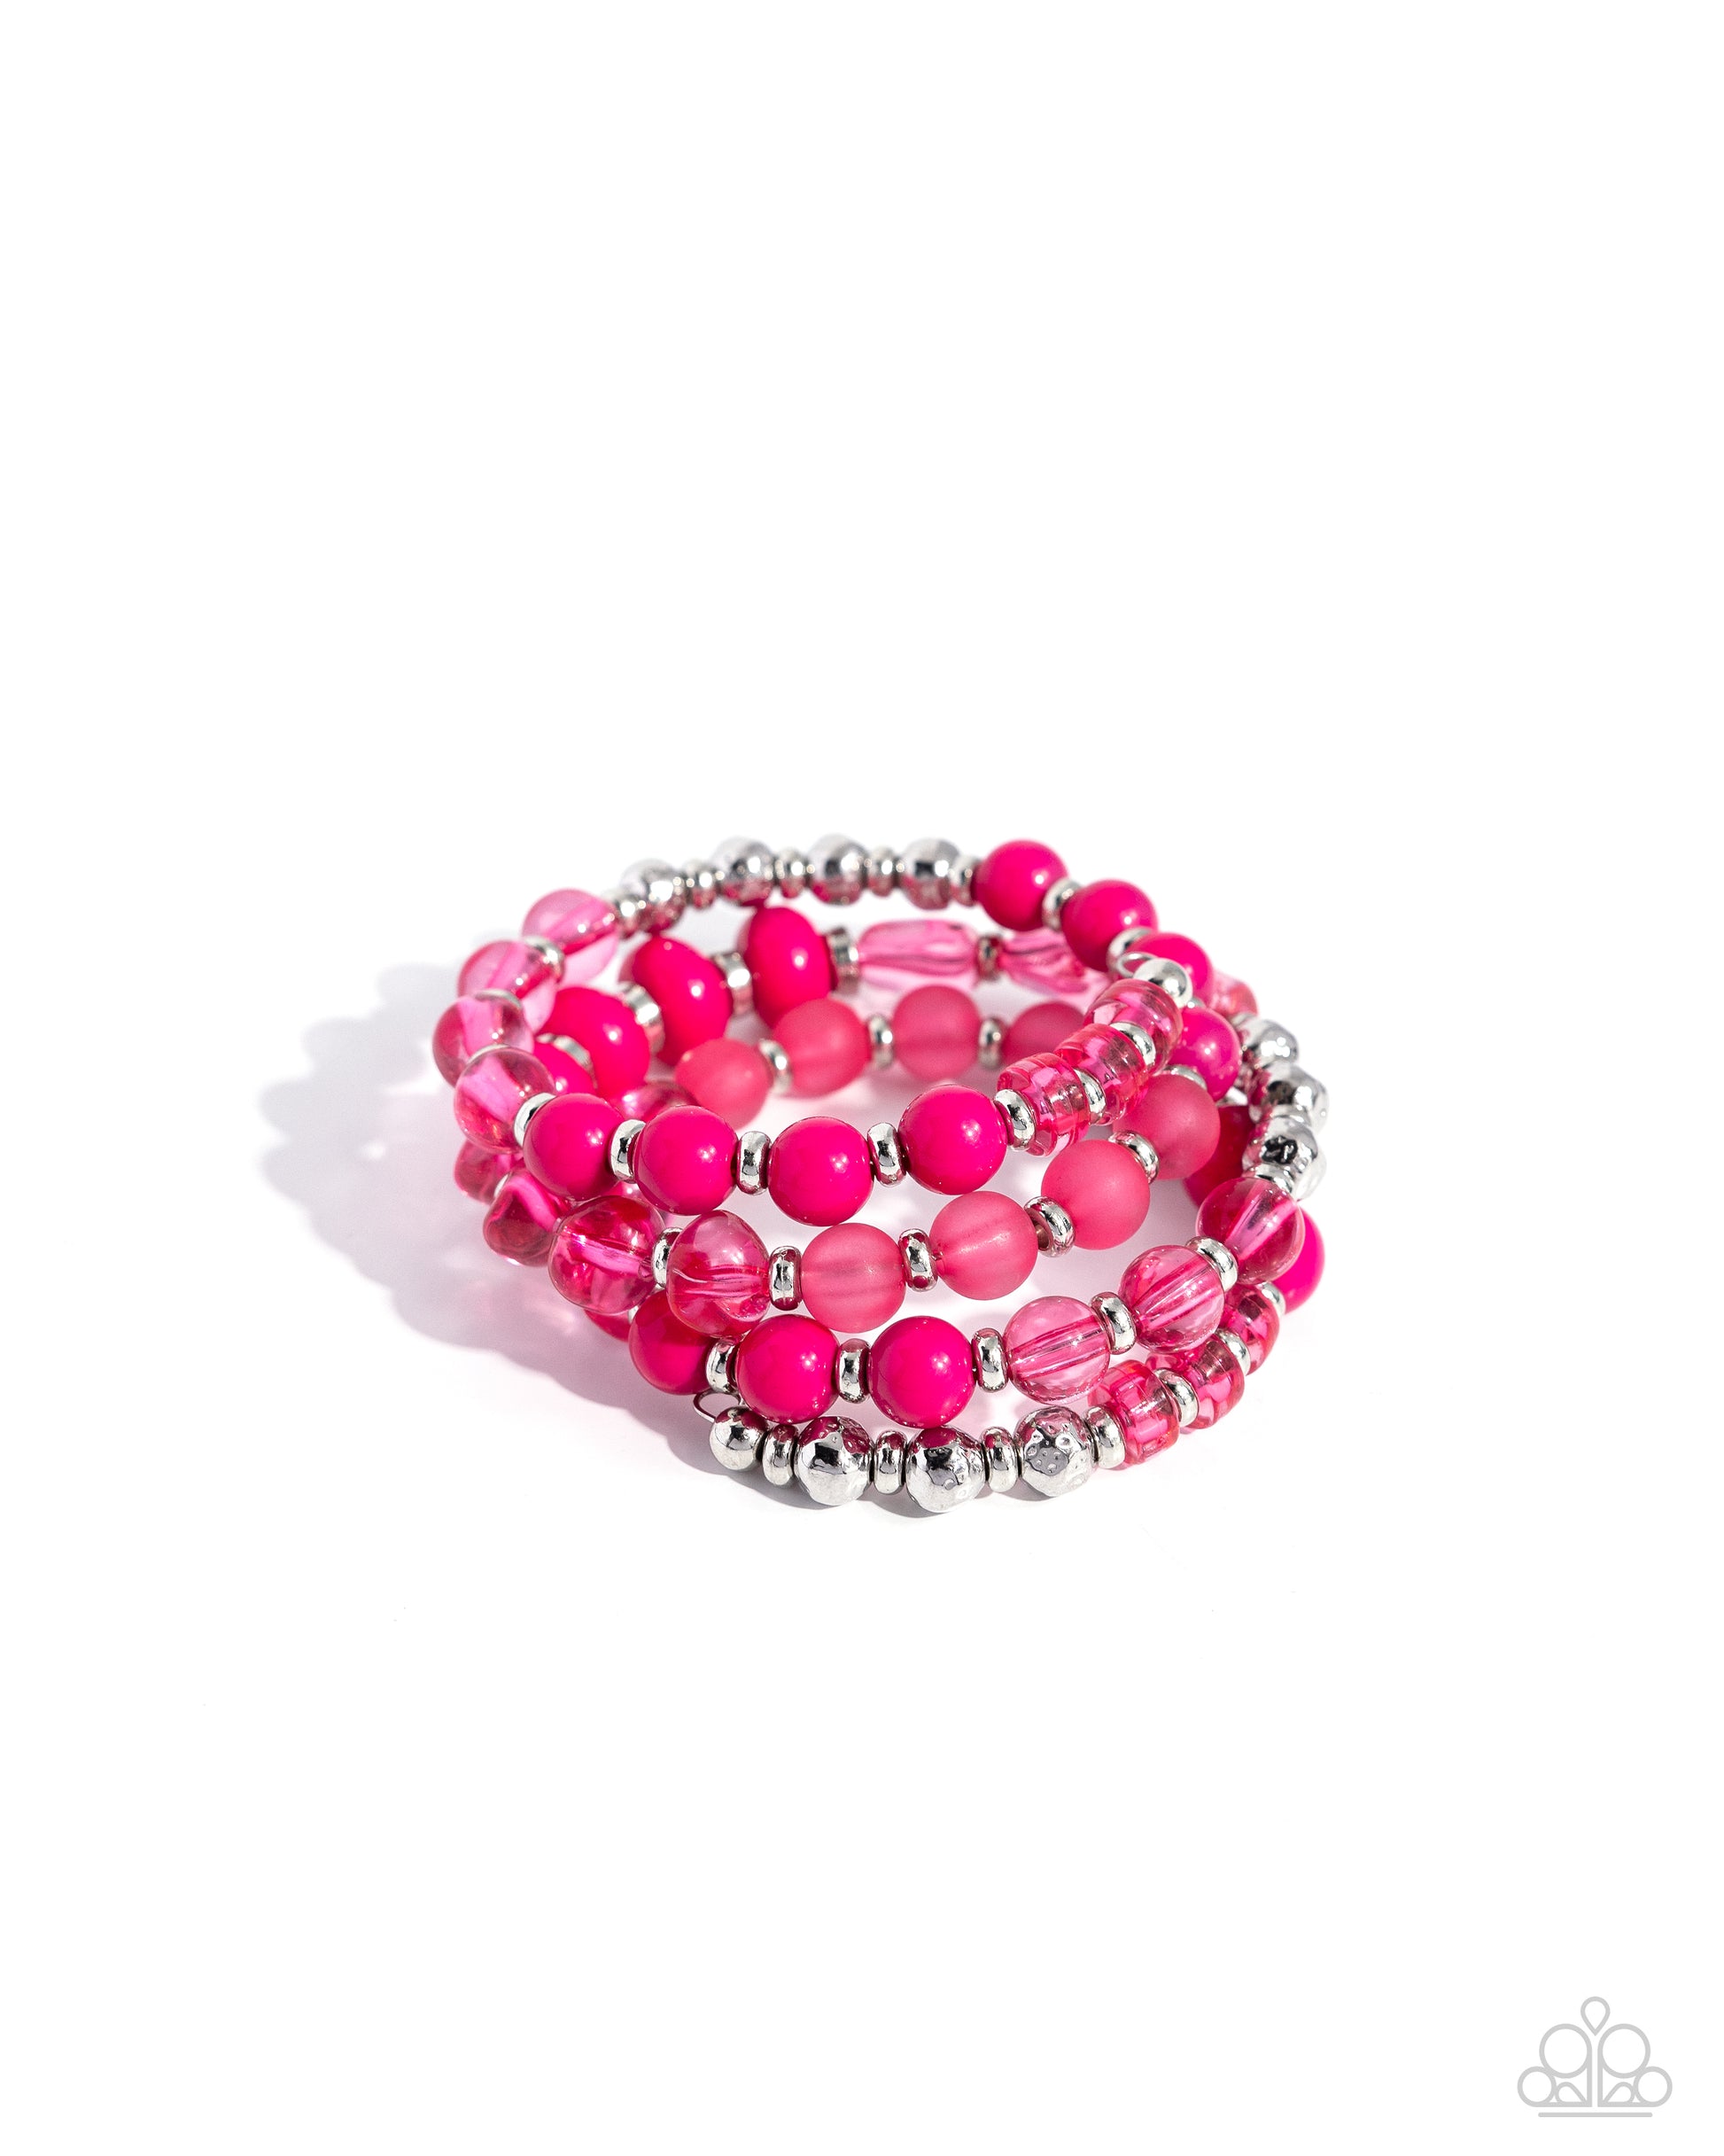 <p>Paparazzi Accessories - Colorful Charade - Pink Bracelets Infused with mismatched silver accents, a bubbly assortment of glassy, opaque, and acrylic pink beads are threaded along a coiled wire around the wrist, creating a vivacious infinity wrap bracelet.</p> <p><i>Sold as one individual bracelet.</i></p>